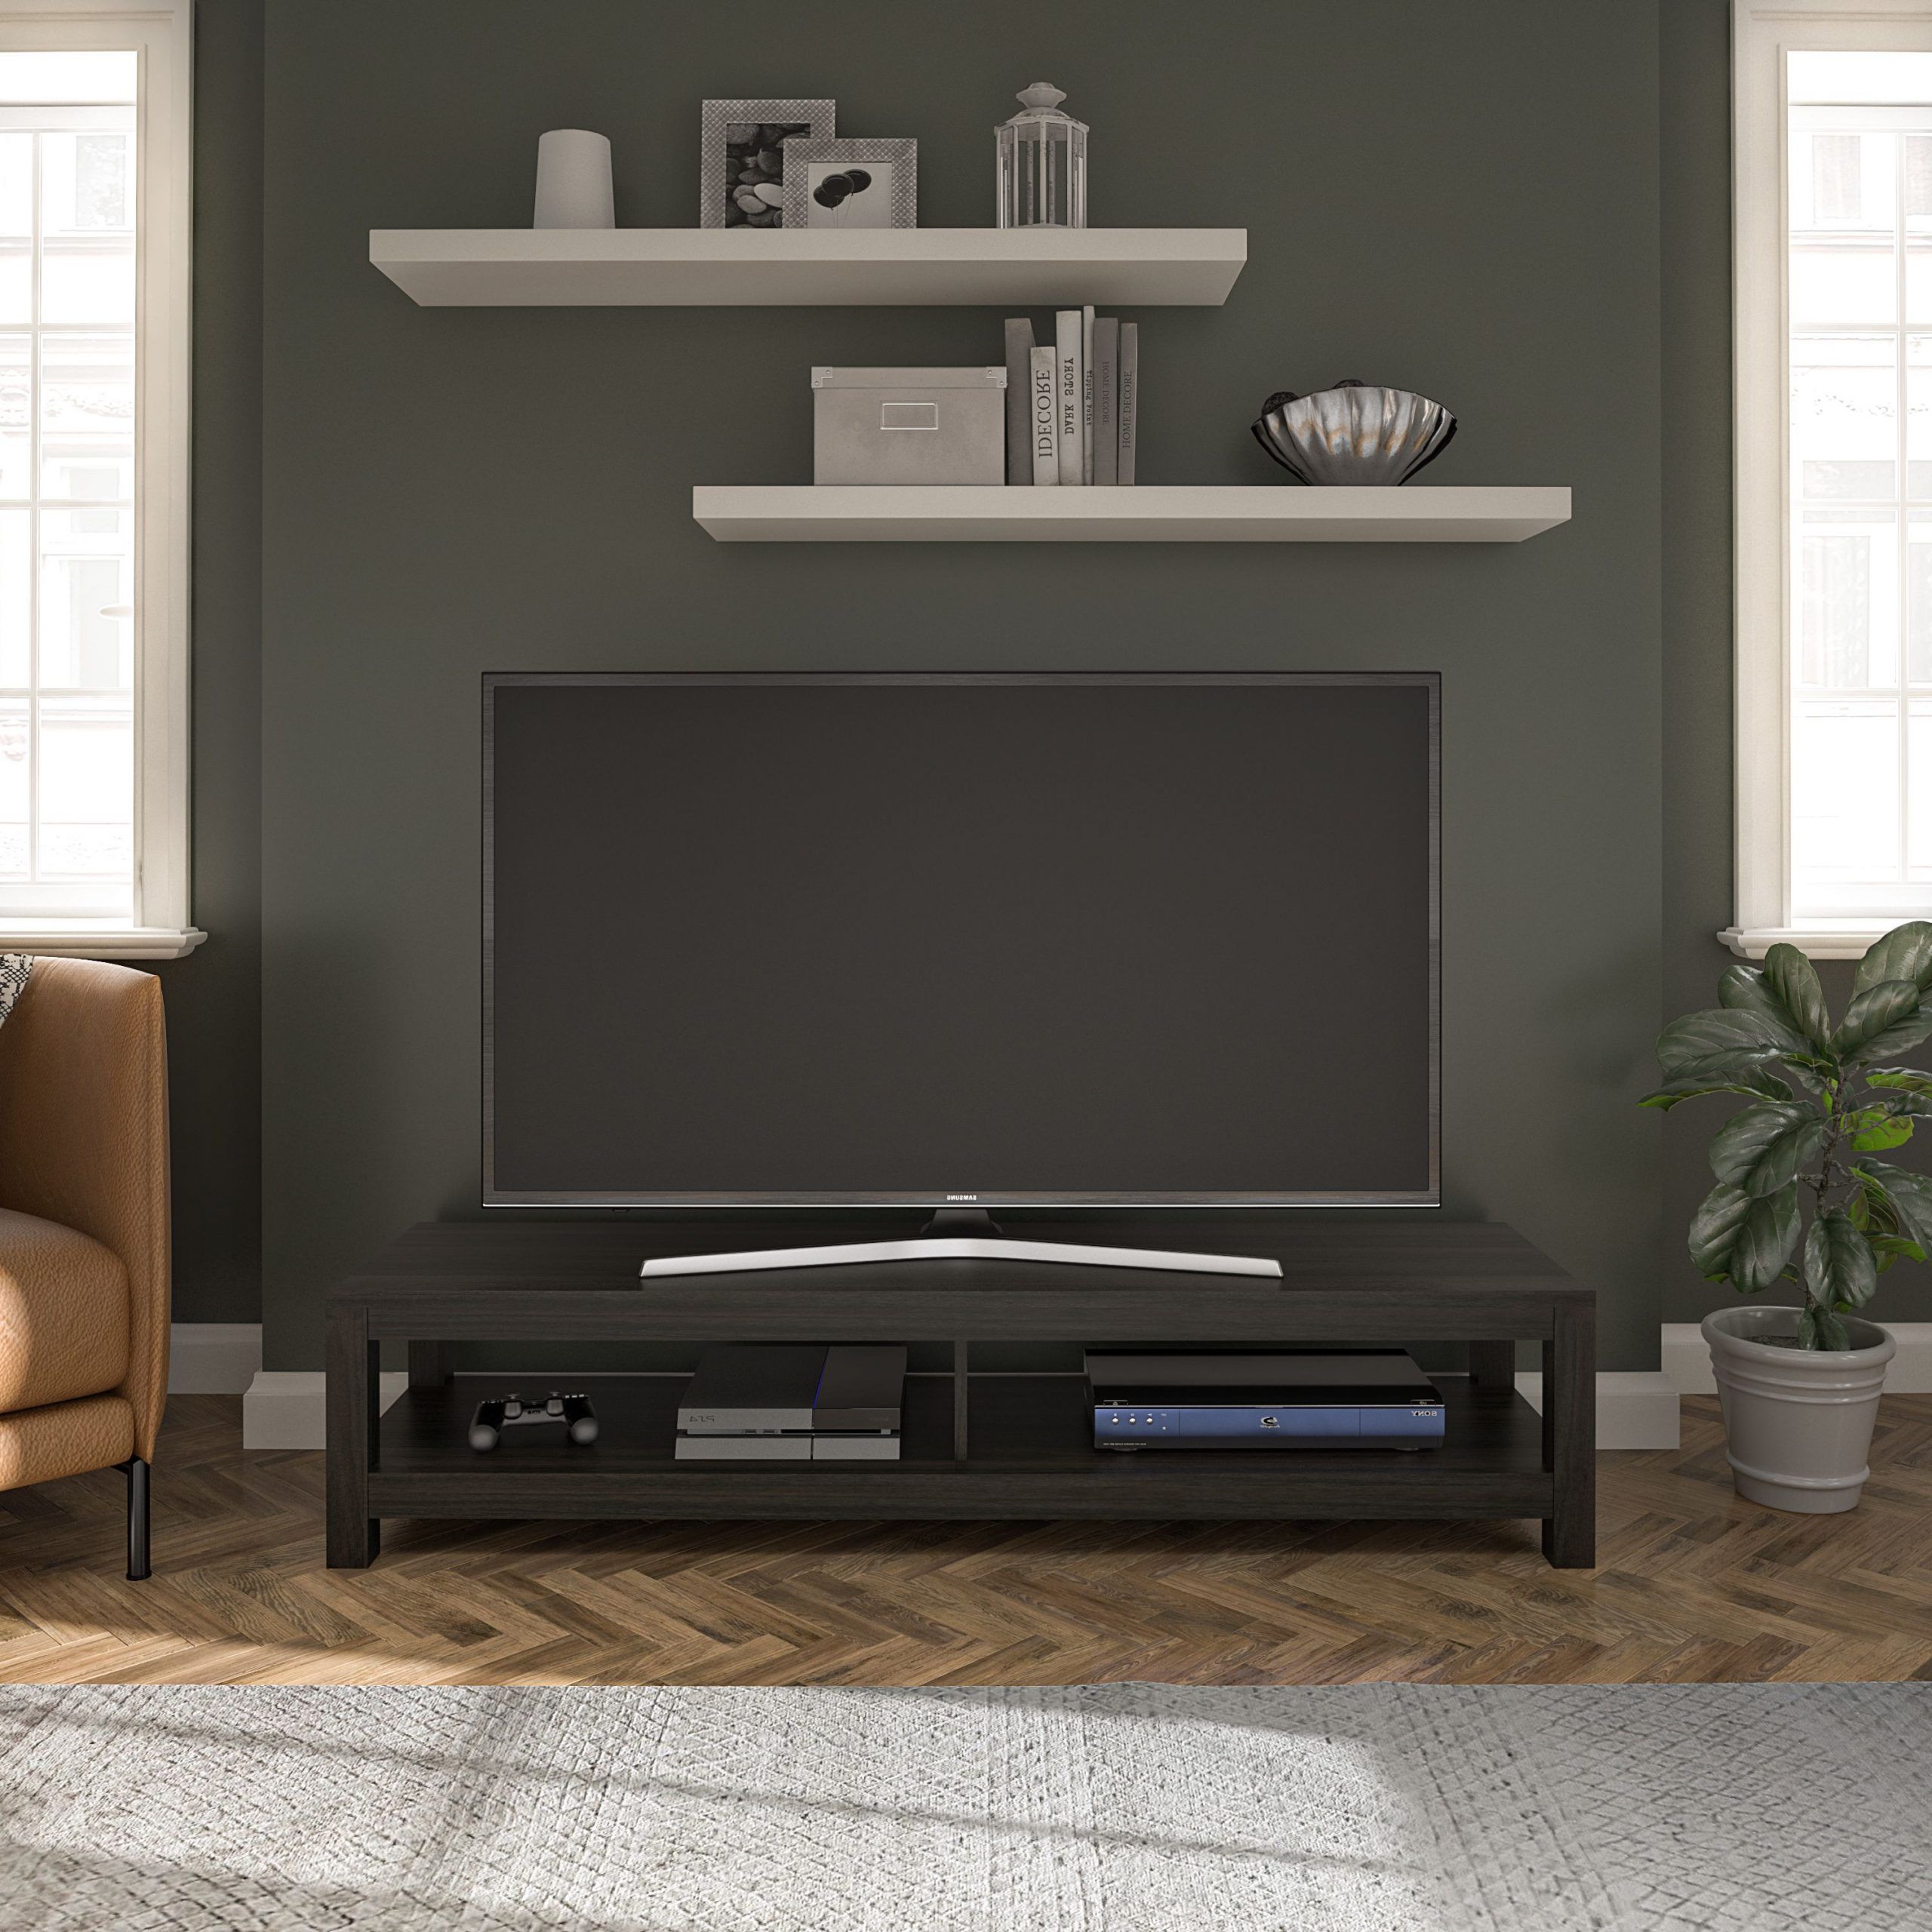 Mainstays Easy Assembly Tv Stand For Tv's Up To 65 In Olinda Tv Stands For Tvs Up To 65" (View 2 of 20)